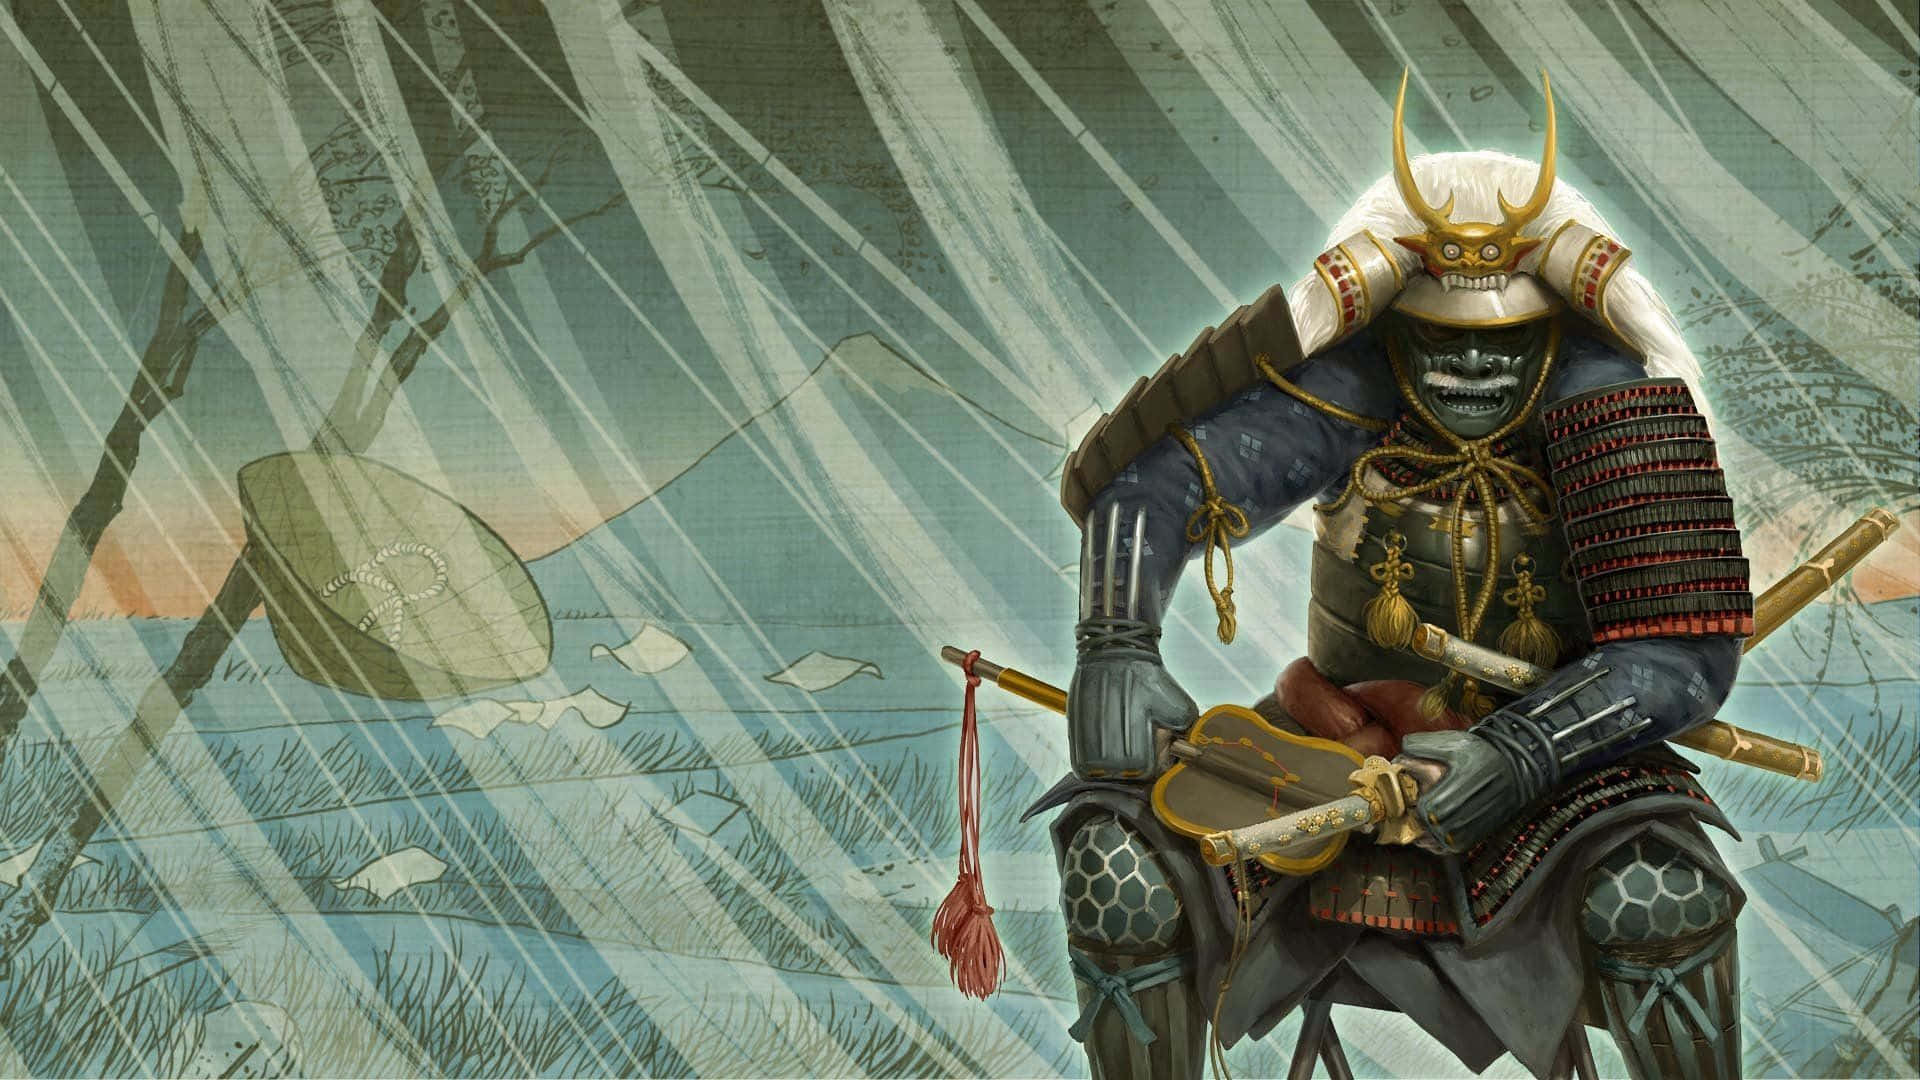 Majestic Shogun on his mighty steed Wallpaper